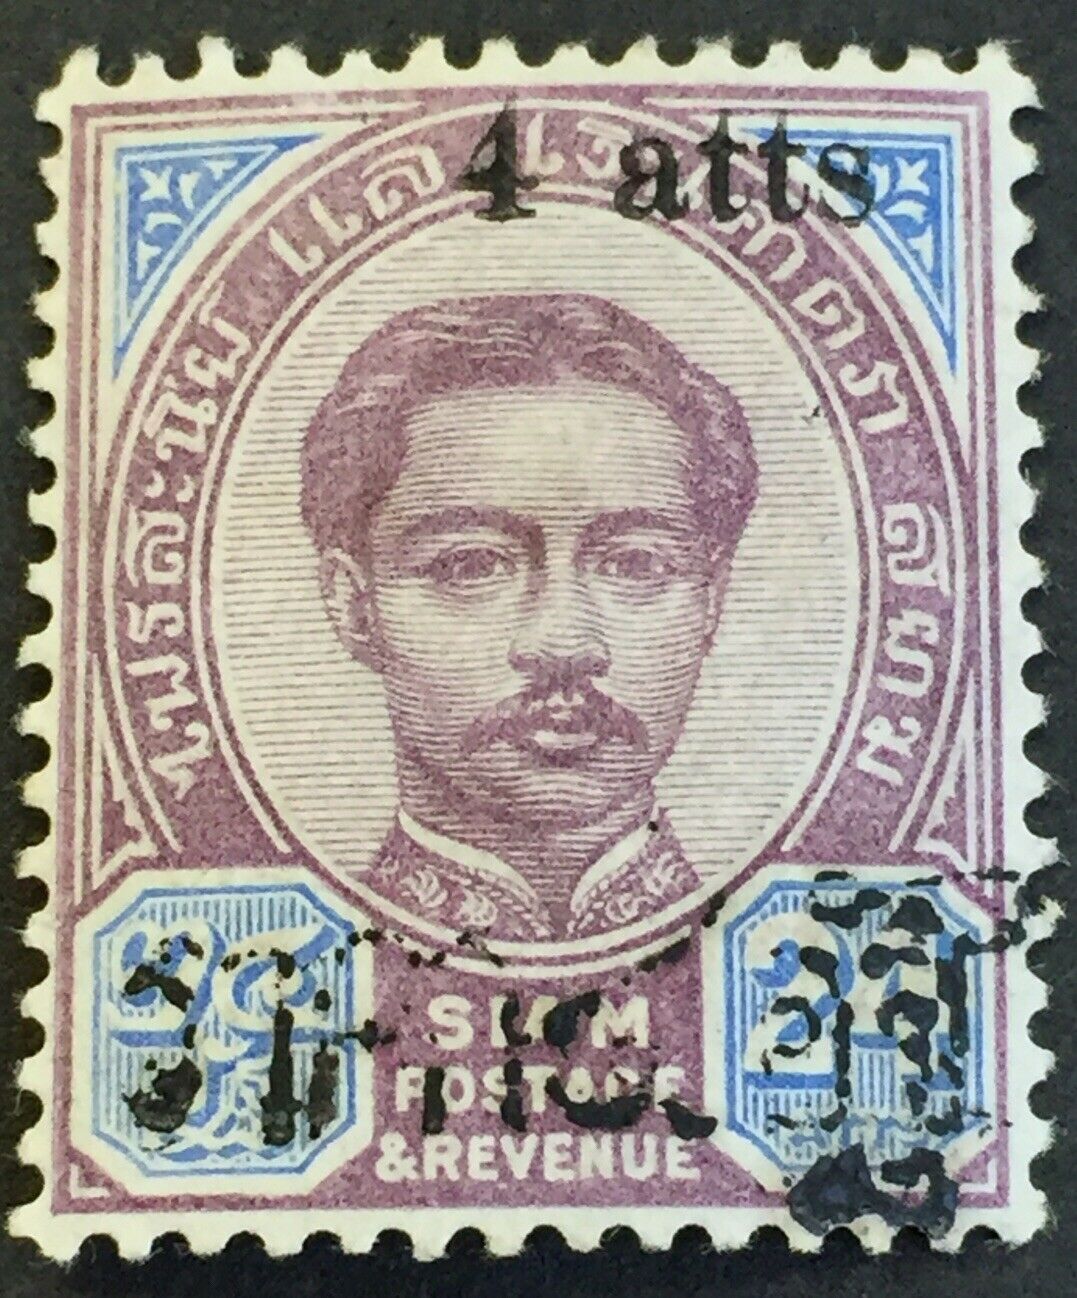 Thailand Nov. 1892 Provisional 4 Atts on 24 Atts Stop Omitted Siriwong 34d Mint